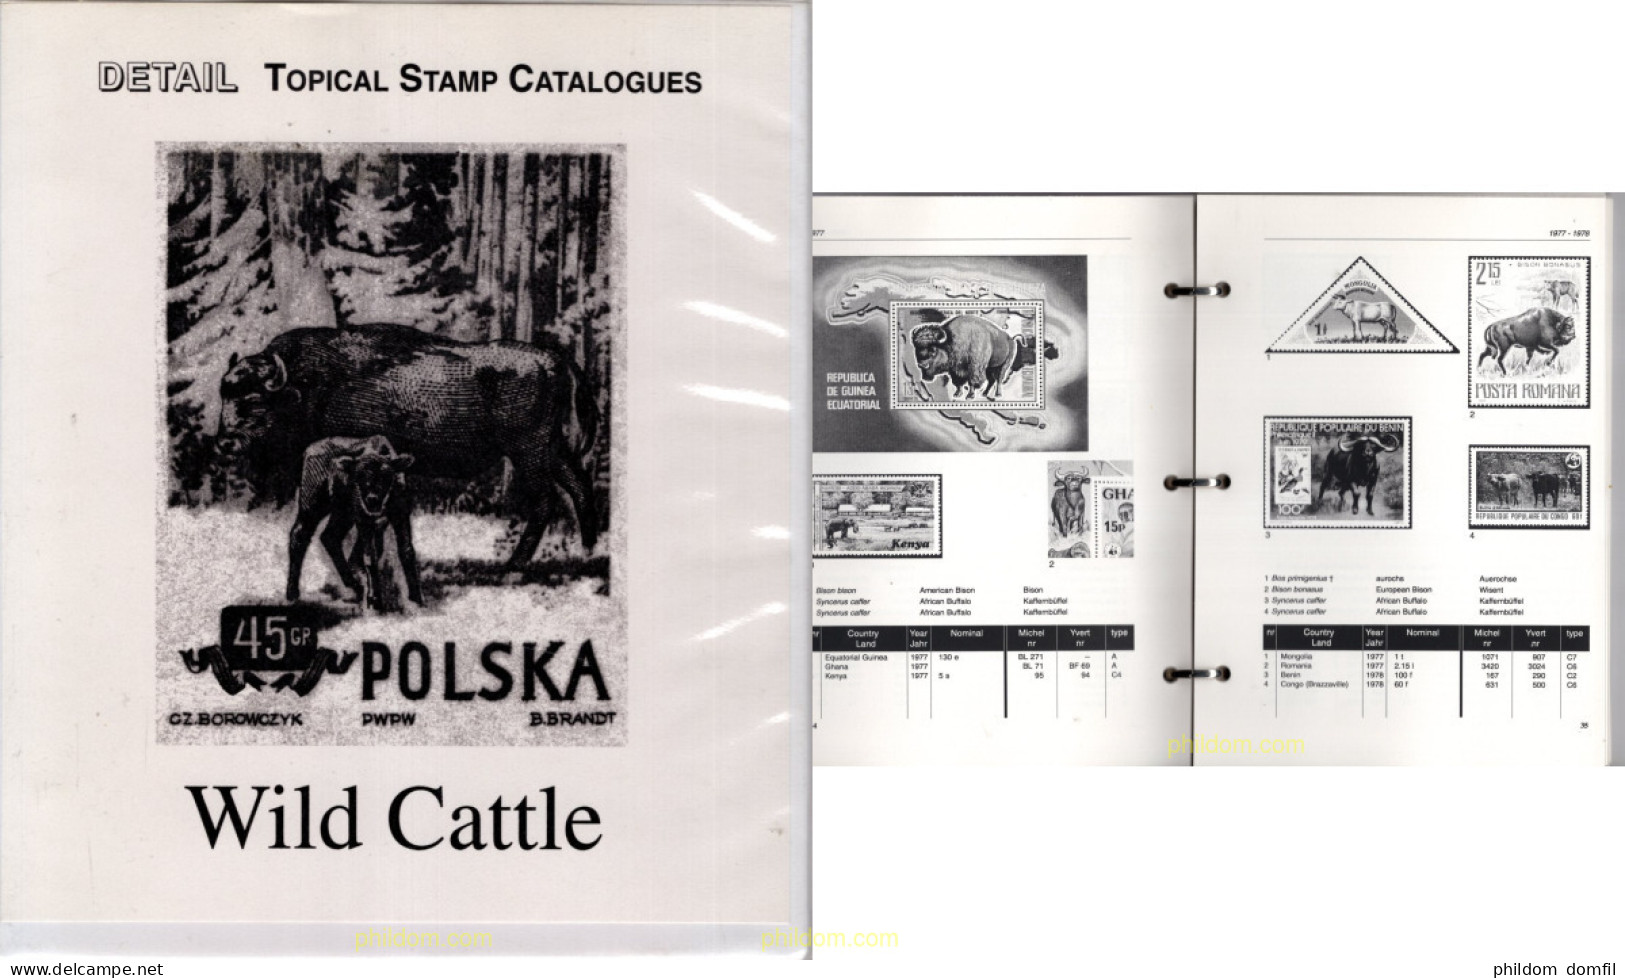 Topical Stamp Caalogues Wild Cattle 1996 - Topics